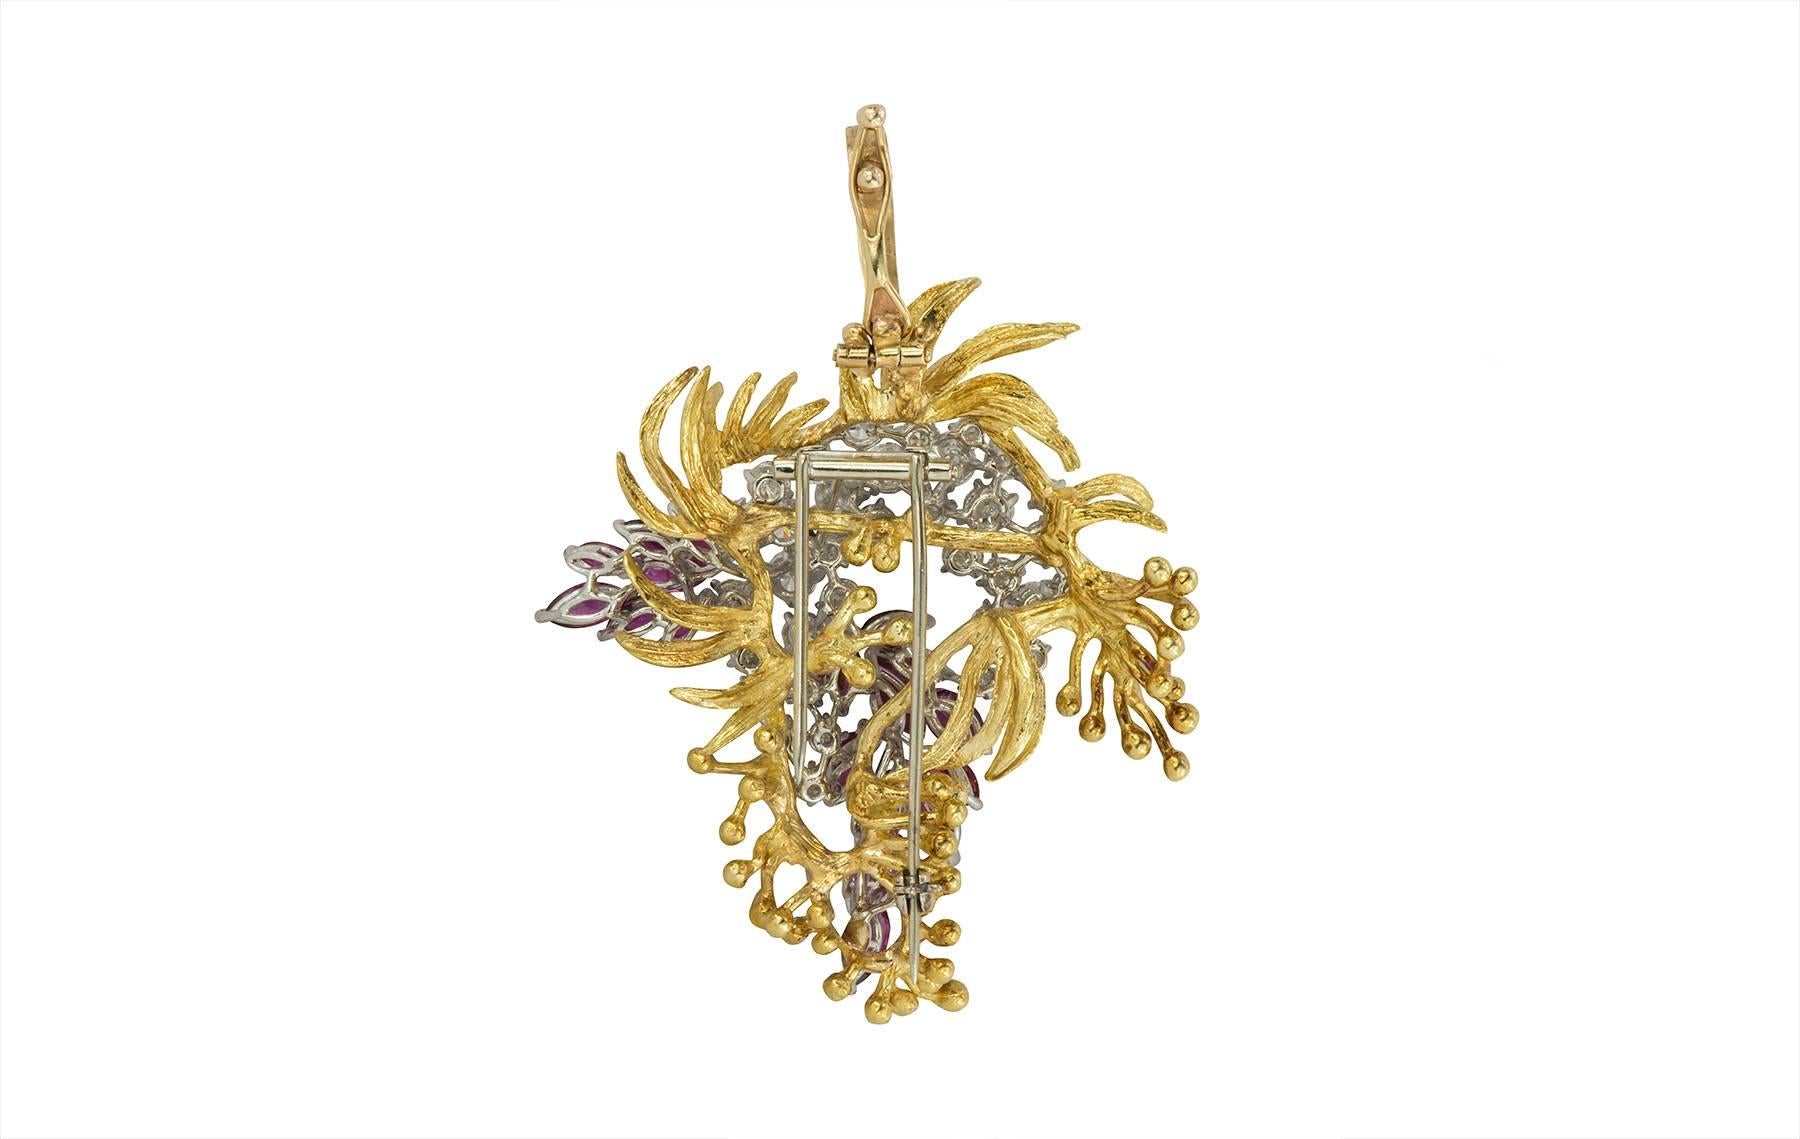 Diamond and ruby platinum and 18k yellow gold pendant and brooch.  The pendant contains 36 round brilliant diamonds of F-G color, VS clarity, weighing 4.55cts, and 19  marquise shaped rubies weighing 5.51cts total.  All of the stones are set in